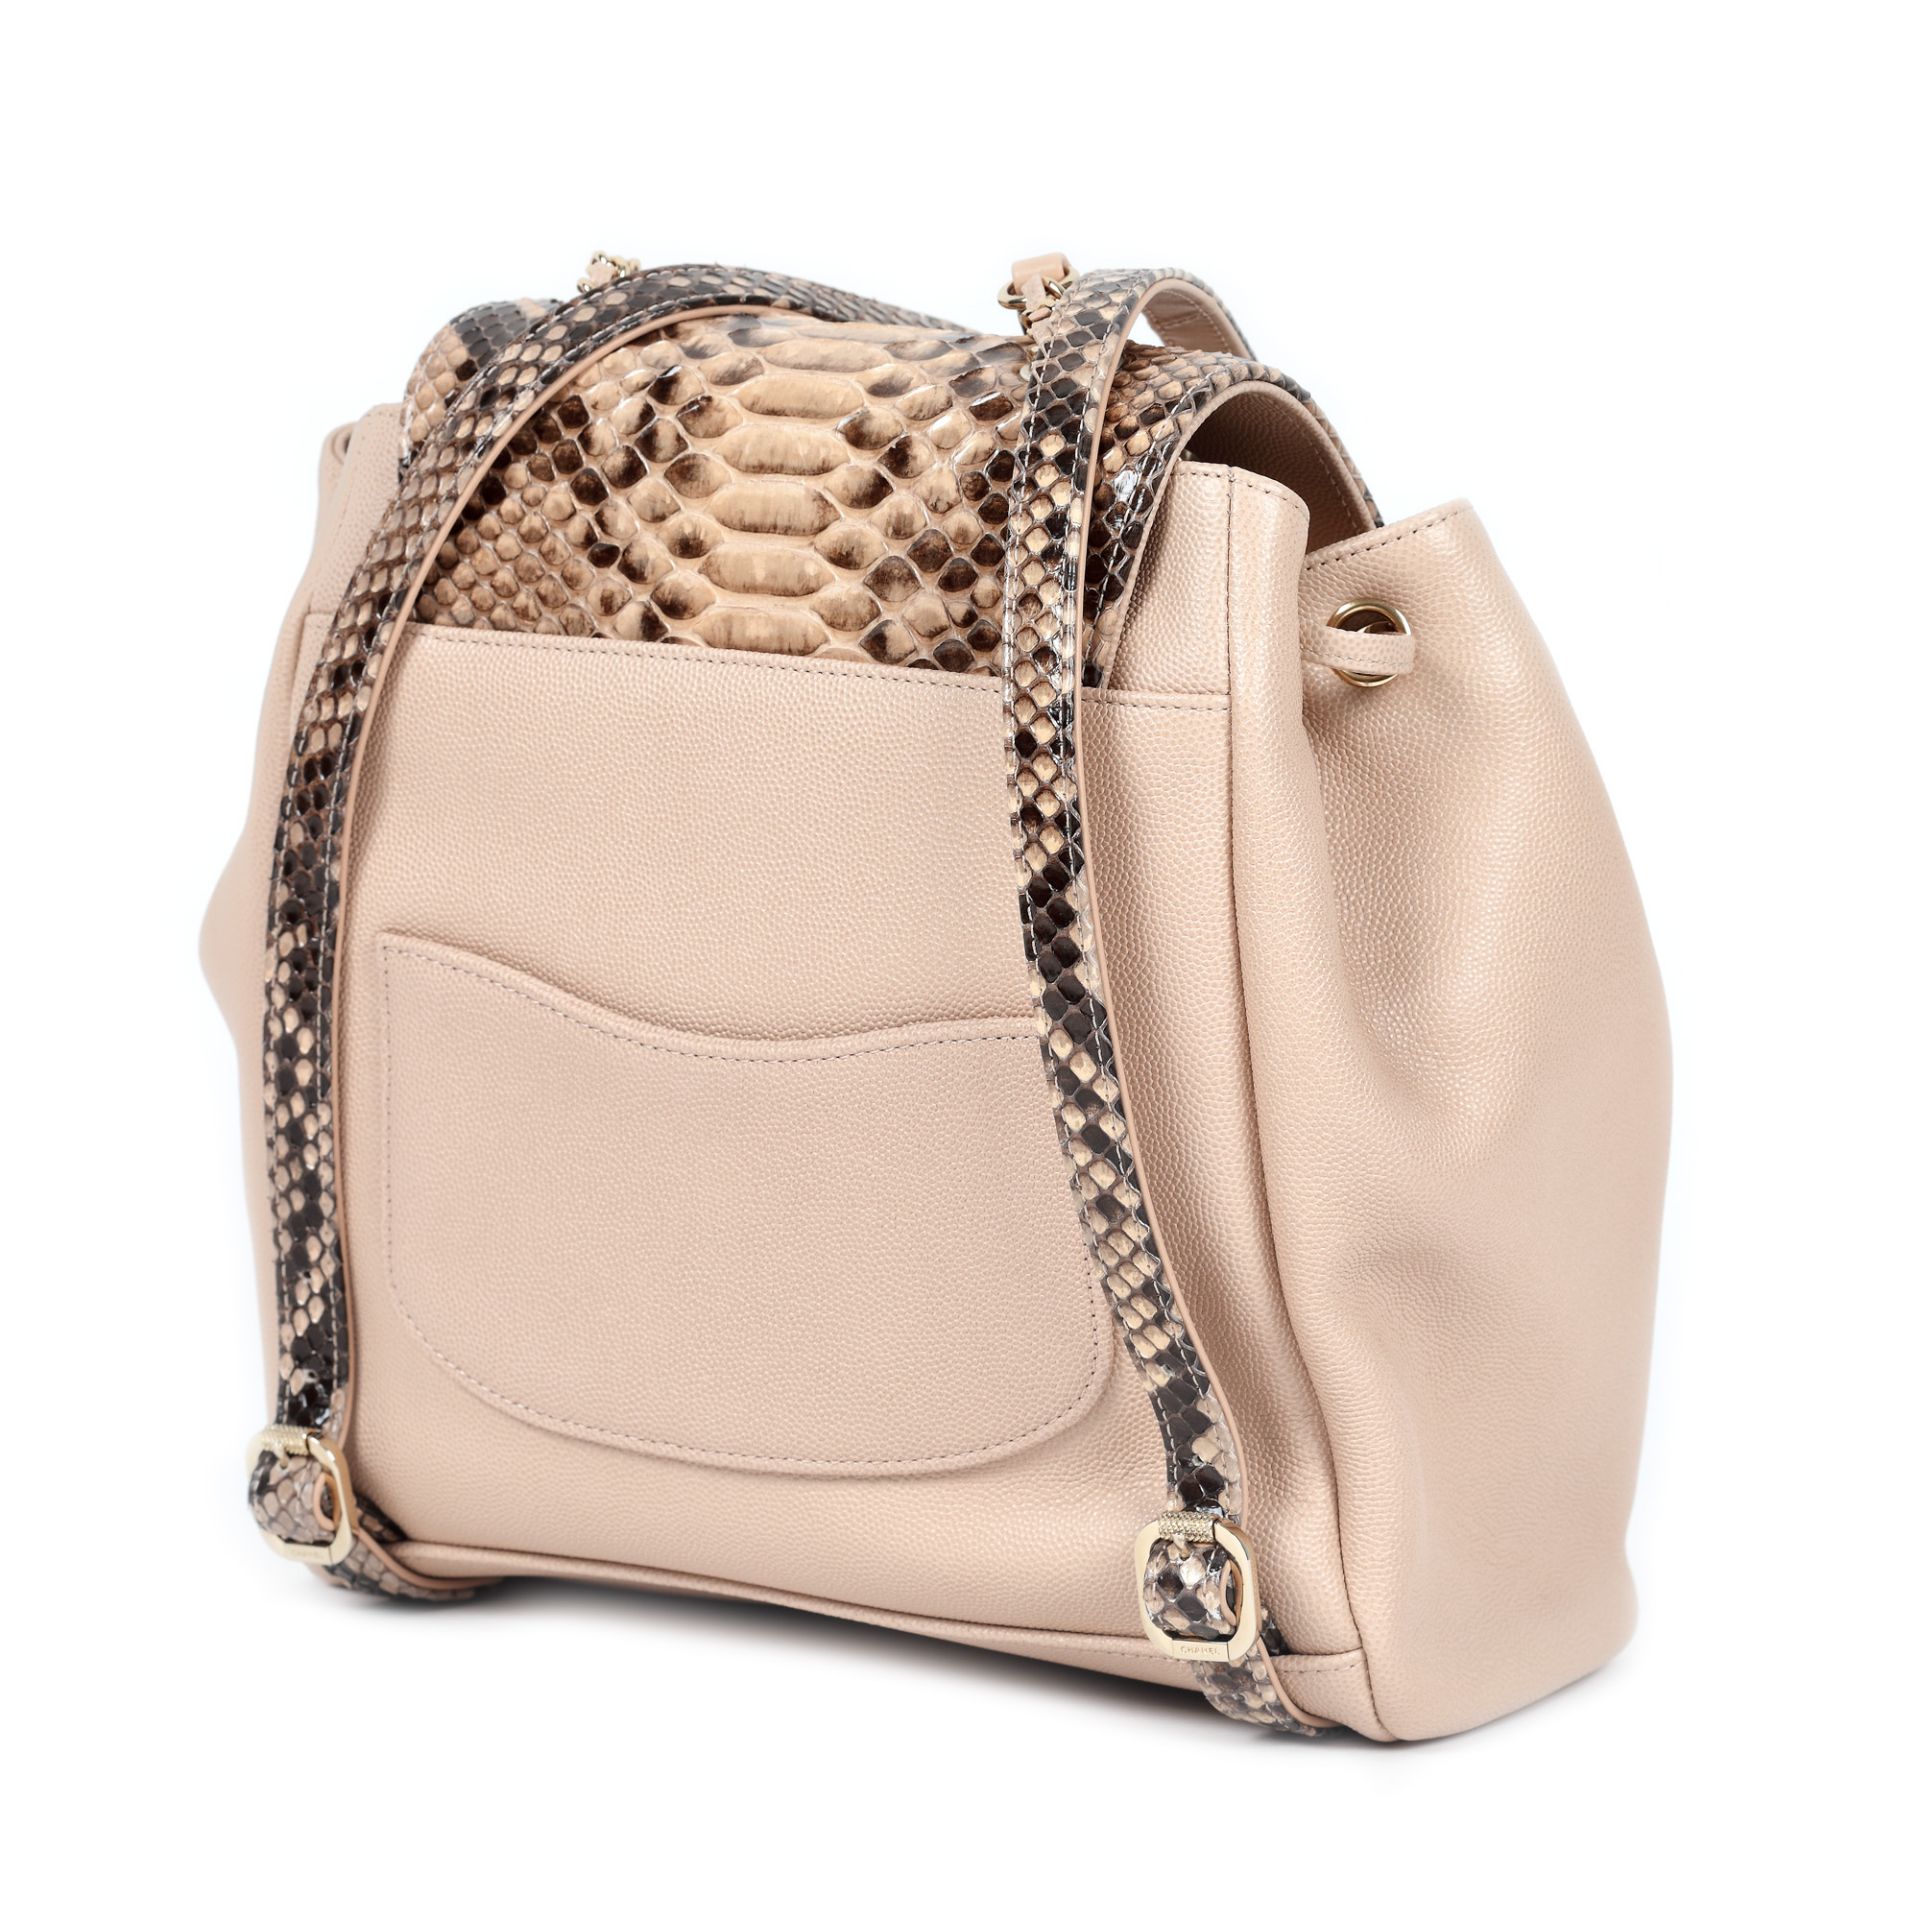 "Business Affinity Backpack" - Chanel backpack, caviar leather and python leather - Image 3 of 6